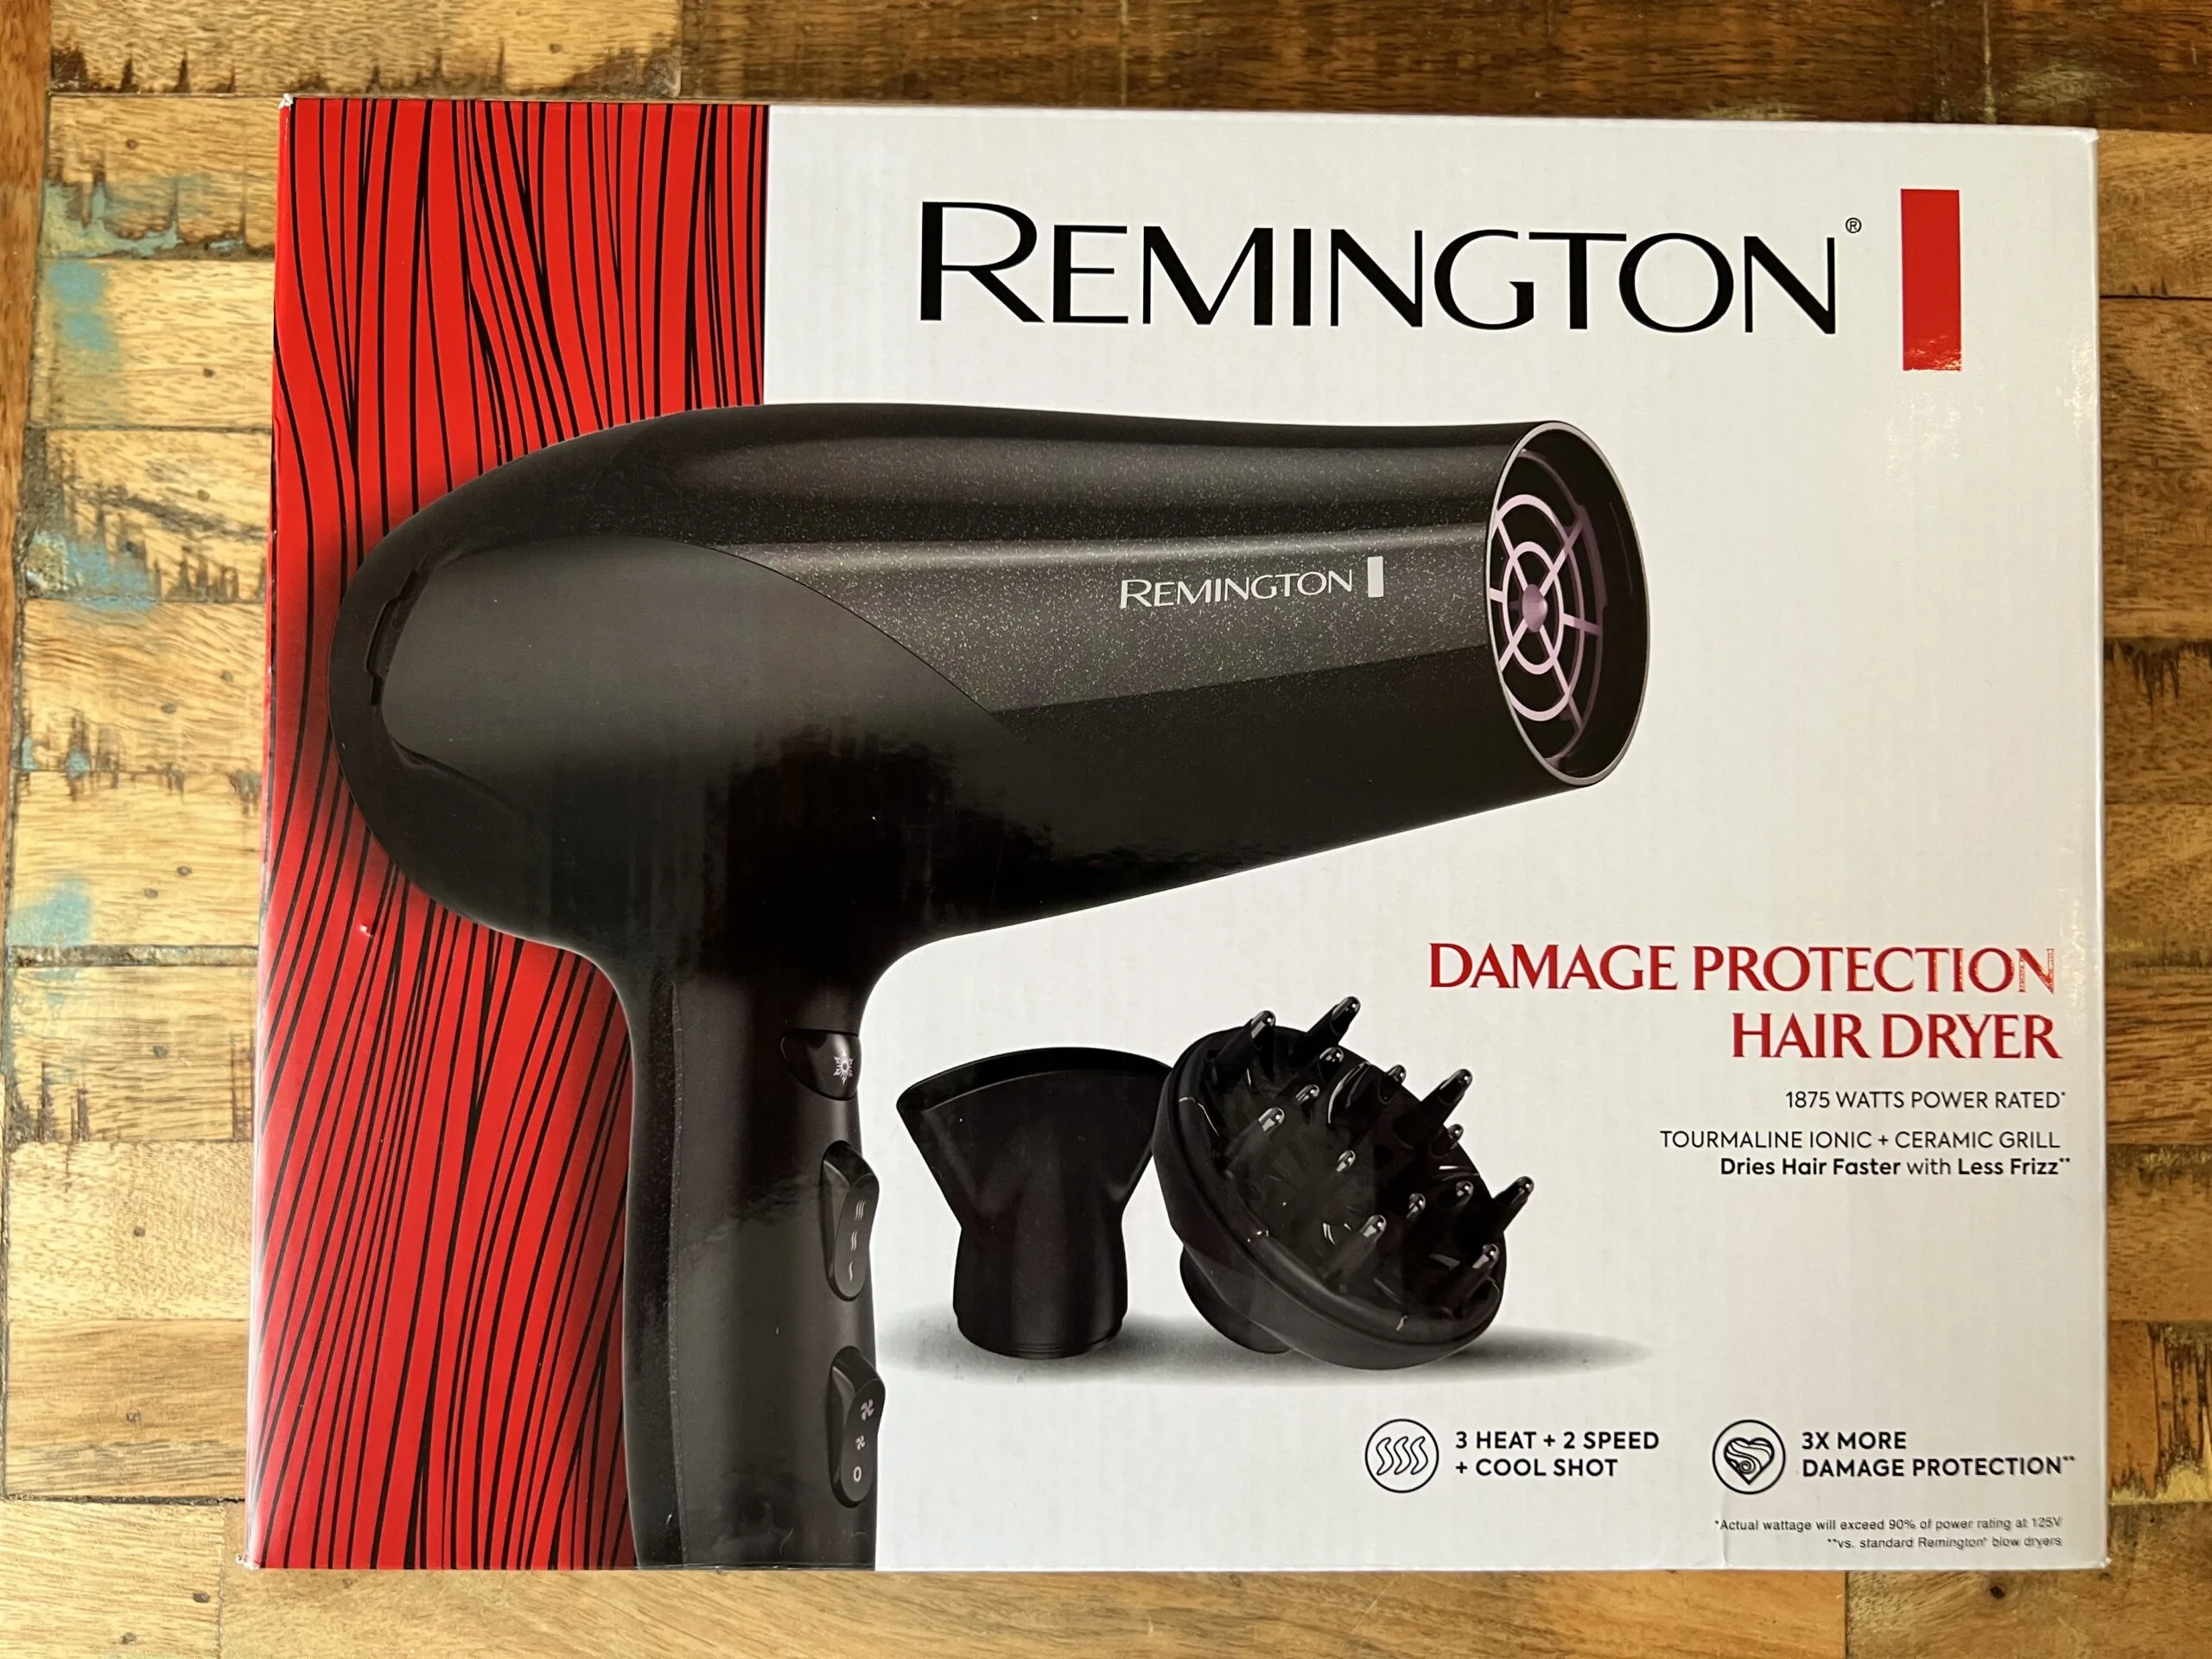 Remington tourmaline ionic damage protection hair dryer with a ceramic grill has a 1875 watts power-rated motor with three heat settings, two-speed settings, and a cool shot button.